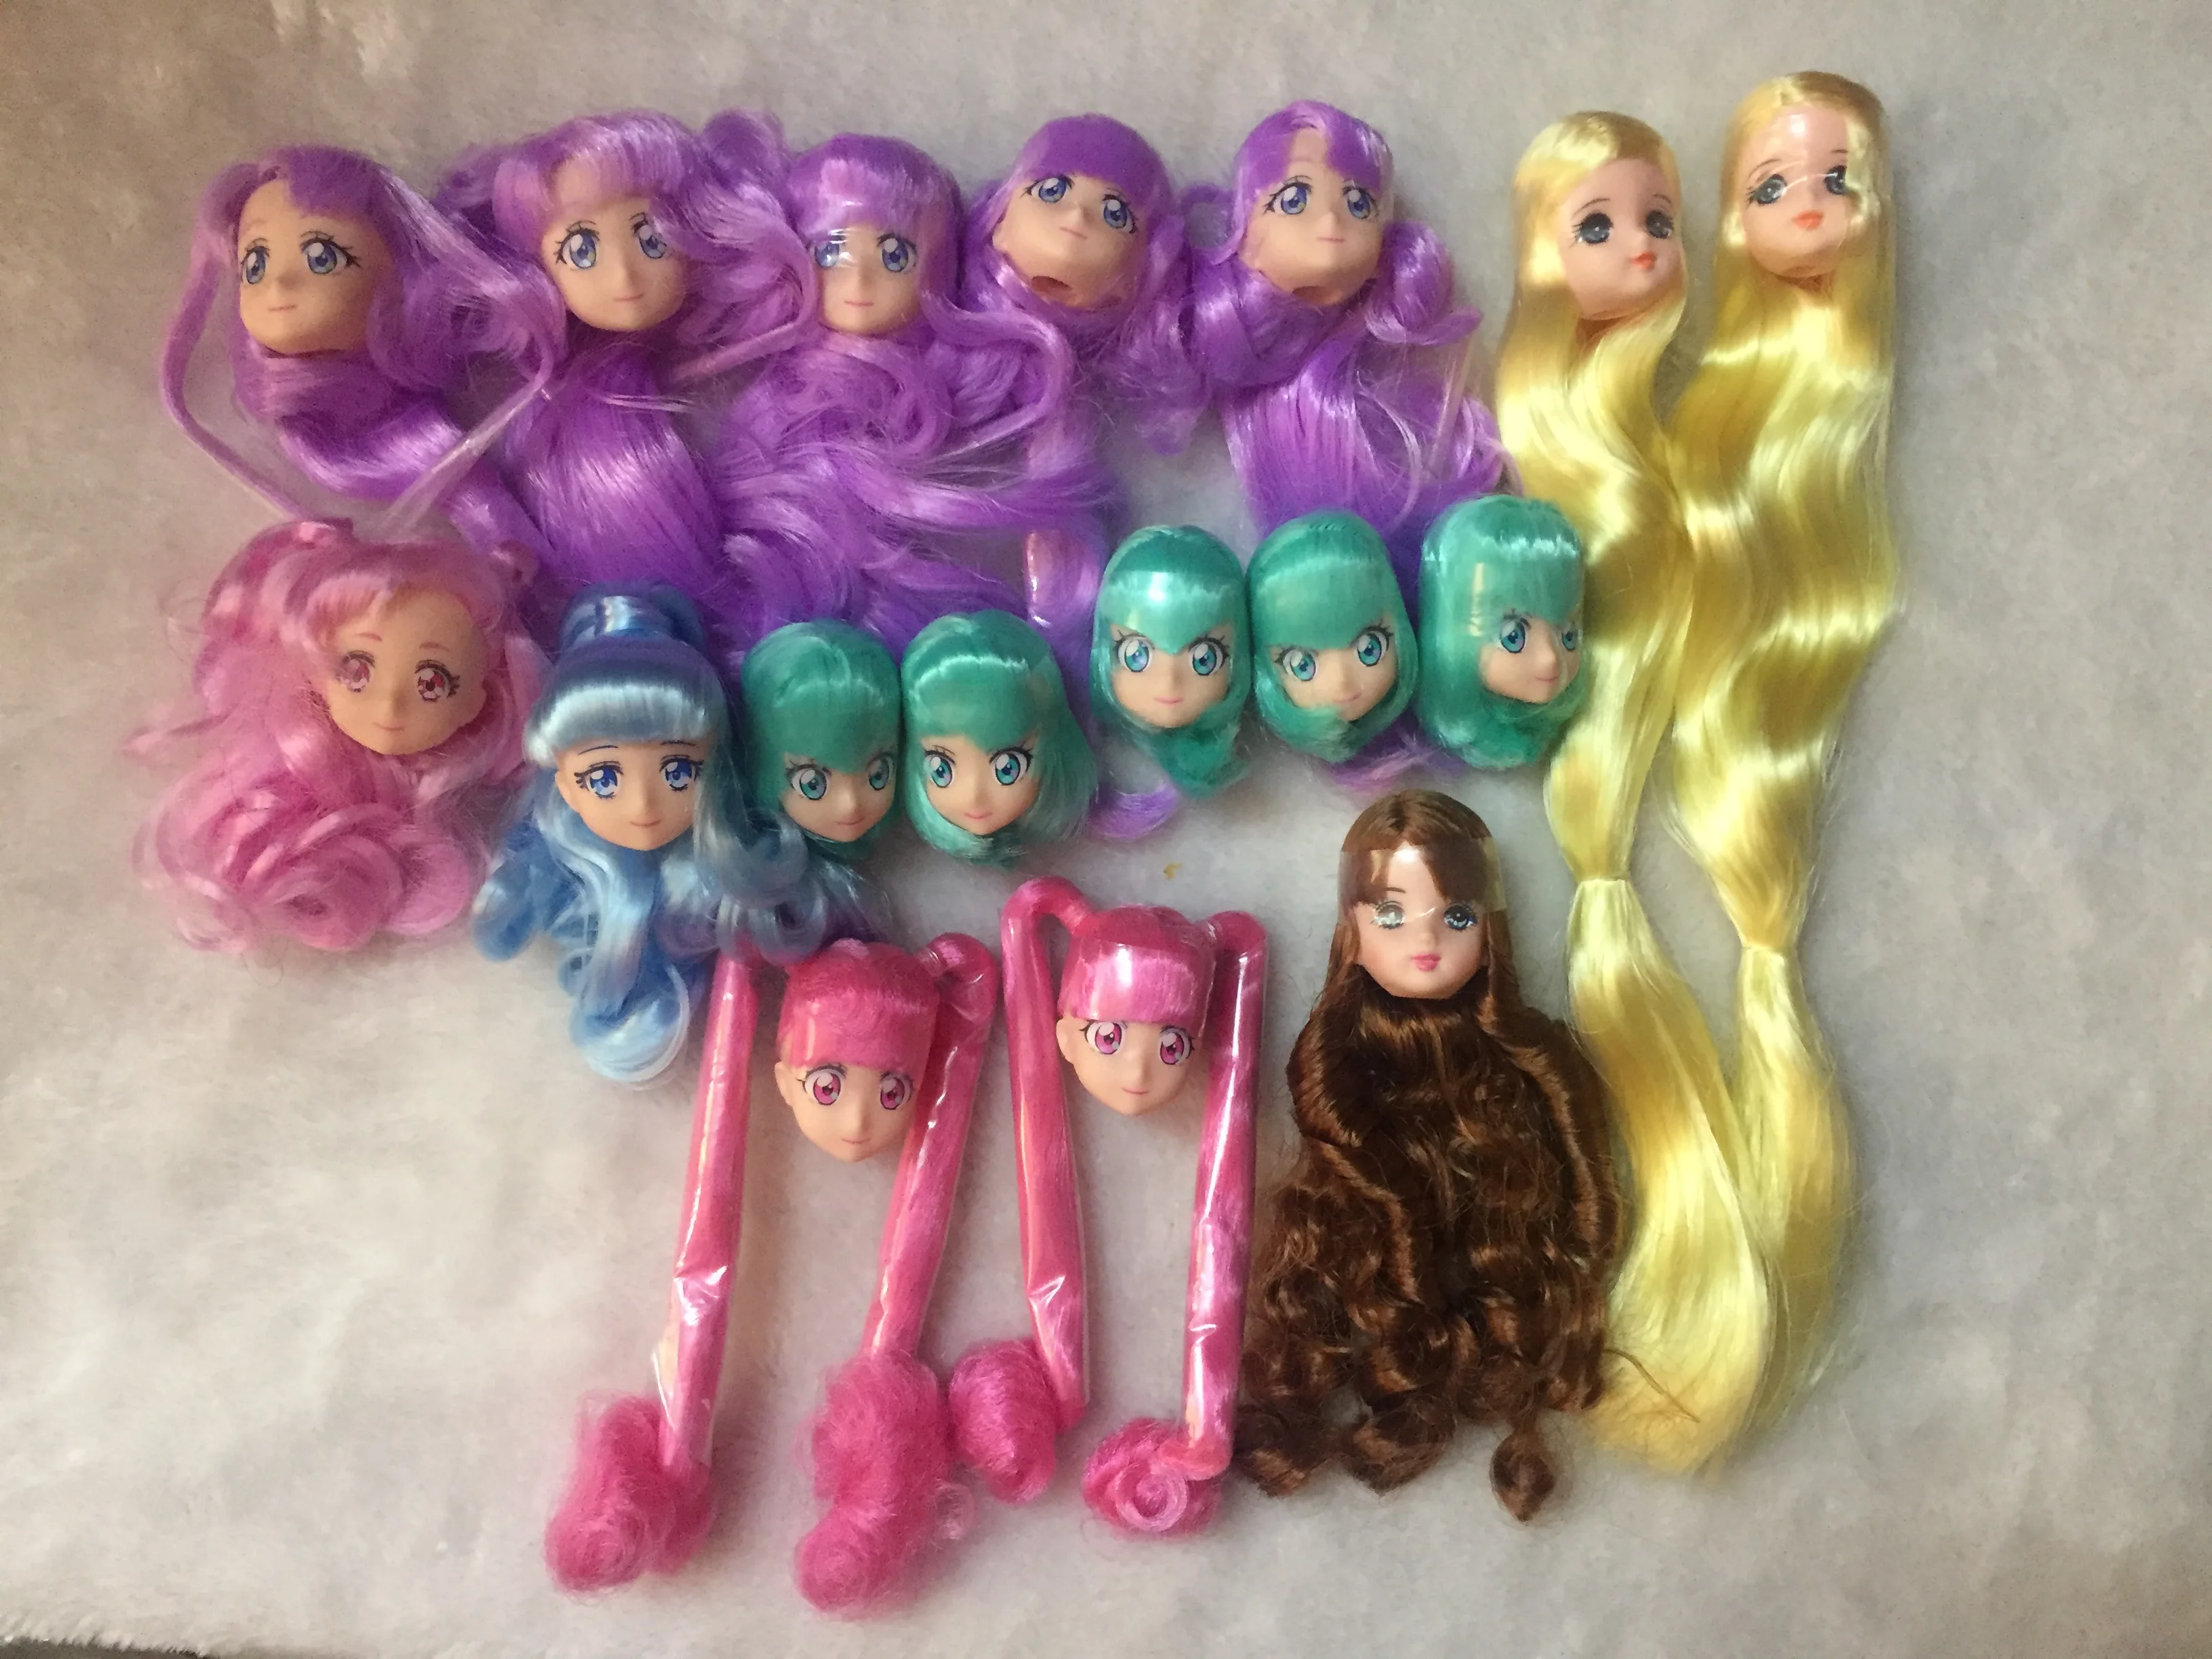 Long Hair Licca Doll Heads Short Long Curve Hair Soft Gold Black Yellow Hair Doll Heads Boy Girl Doll Parts DIY Accessories Toy 10pcs japan skrgaed010 touch switch 6 6 5 button with two white heads and long life